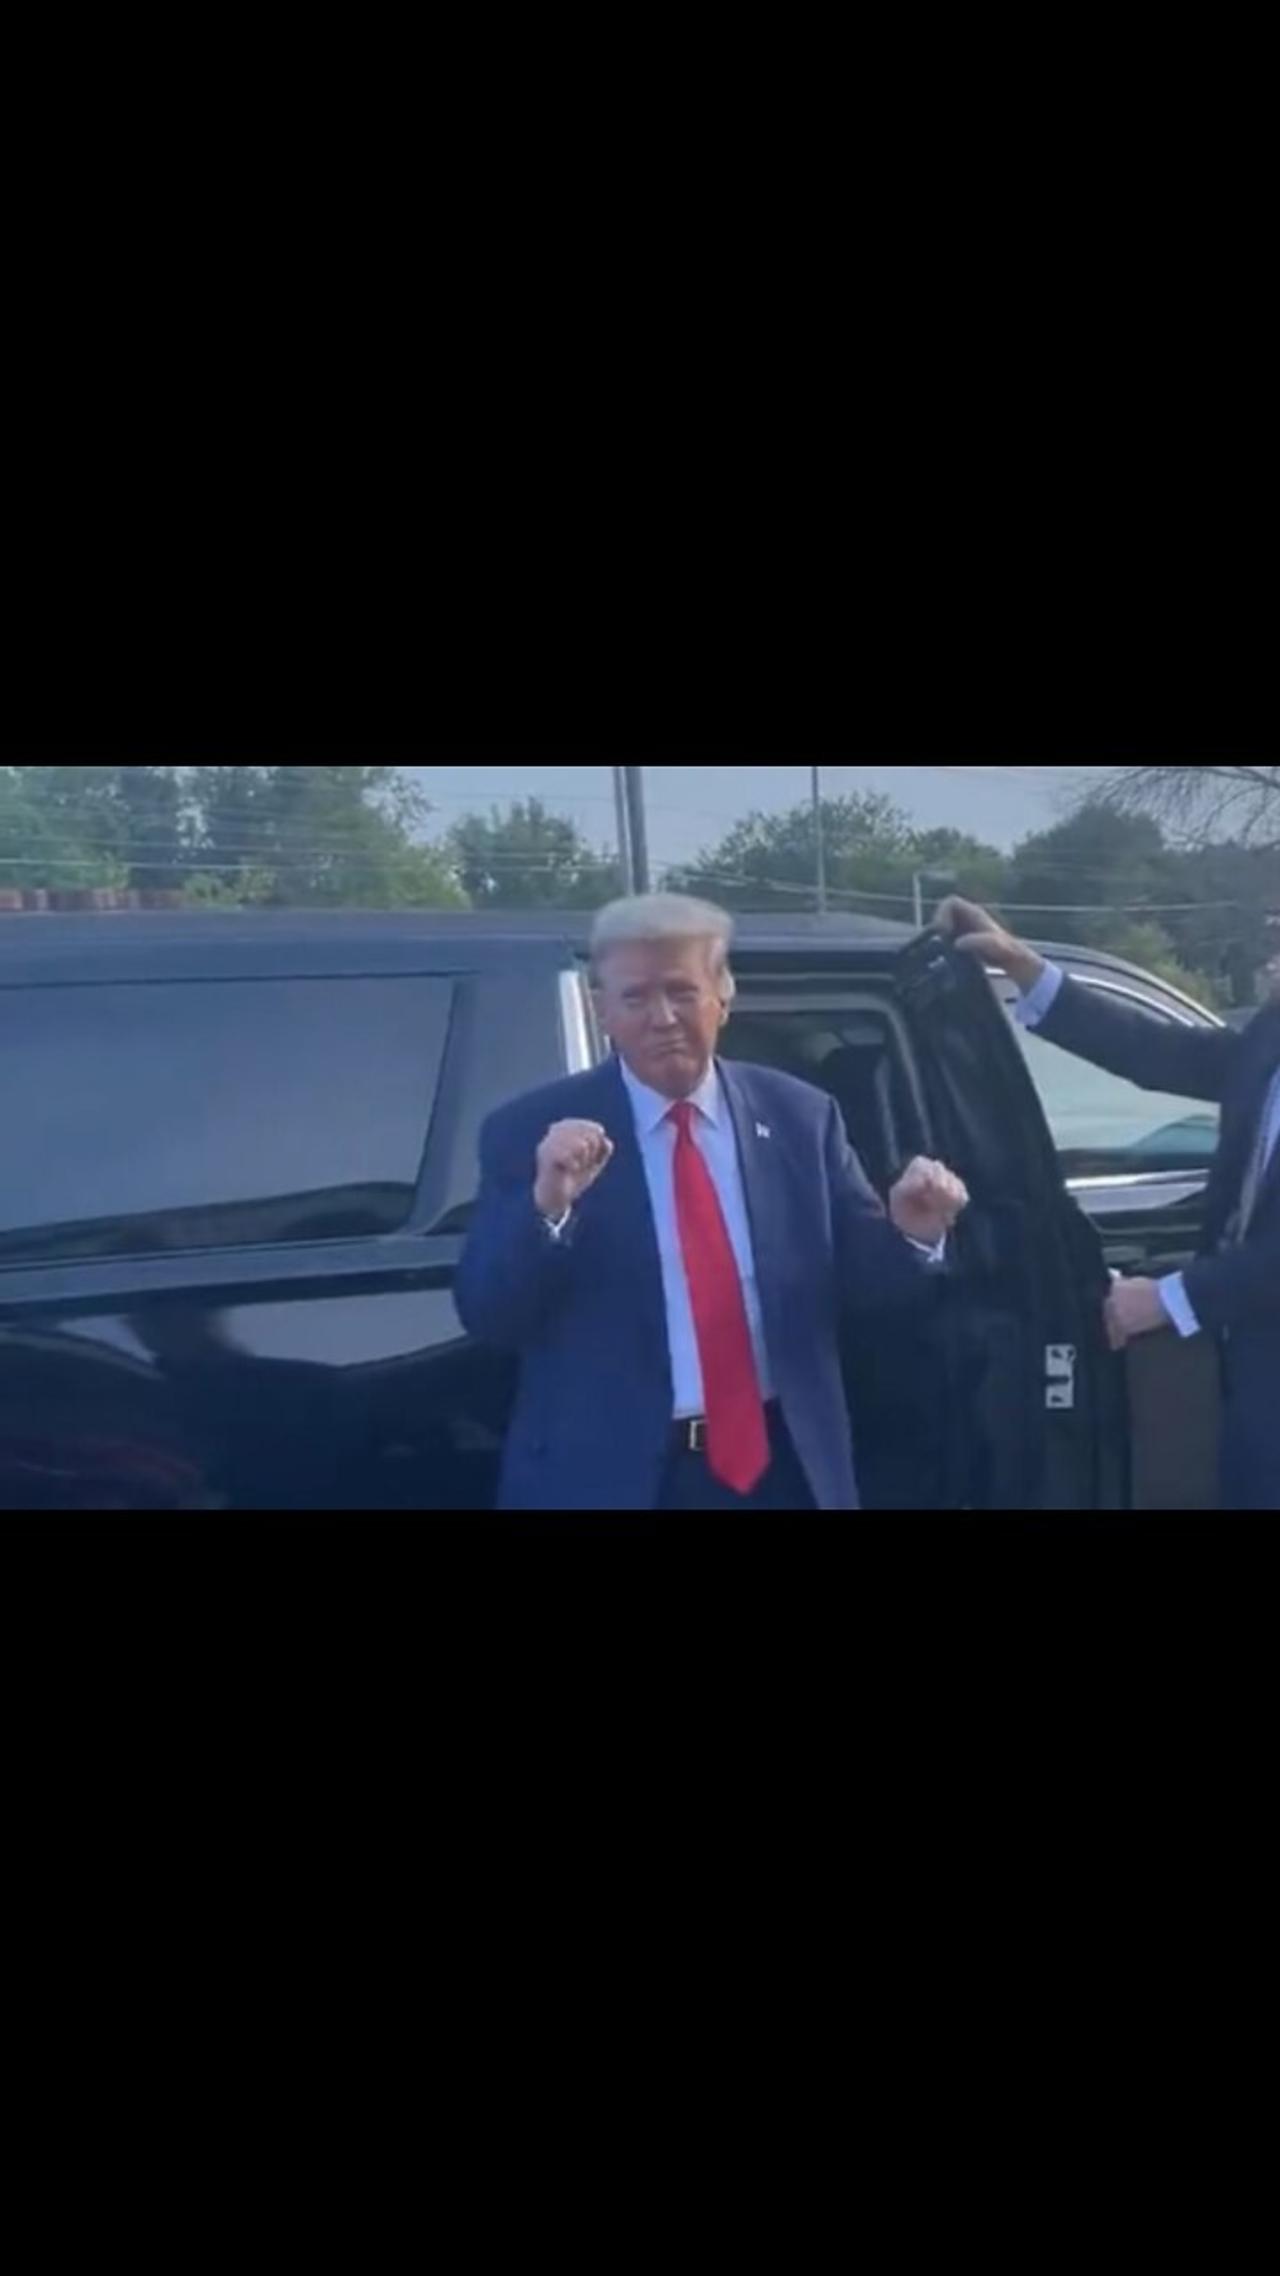 Trump Breaks Out Dance Moves on Campaign Trail in Iowa